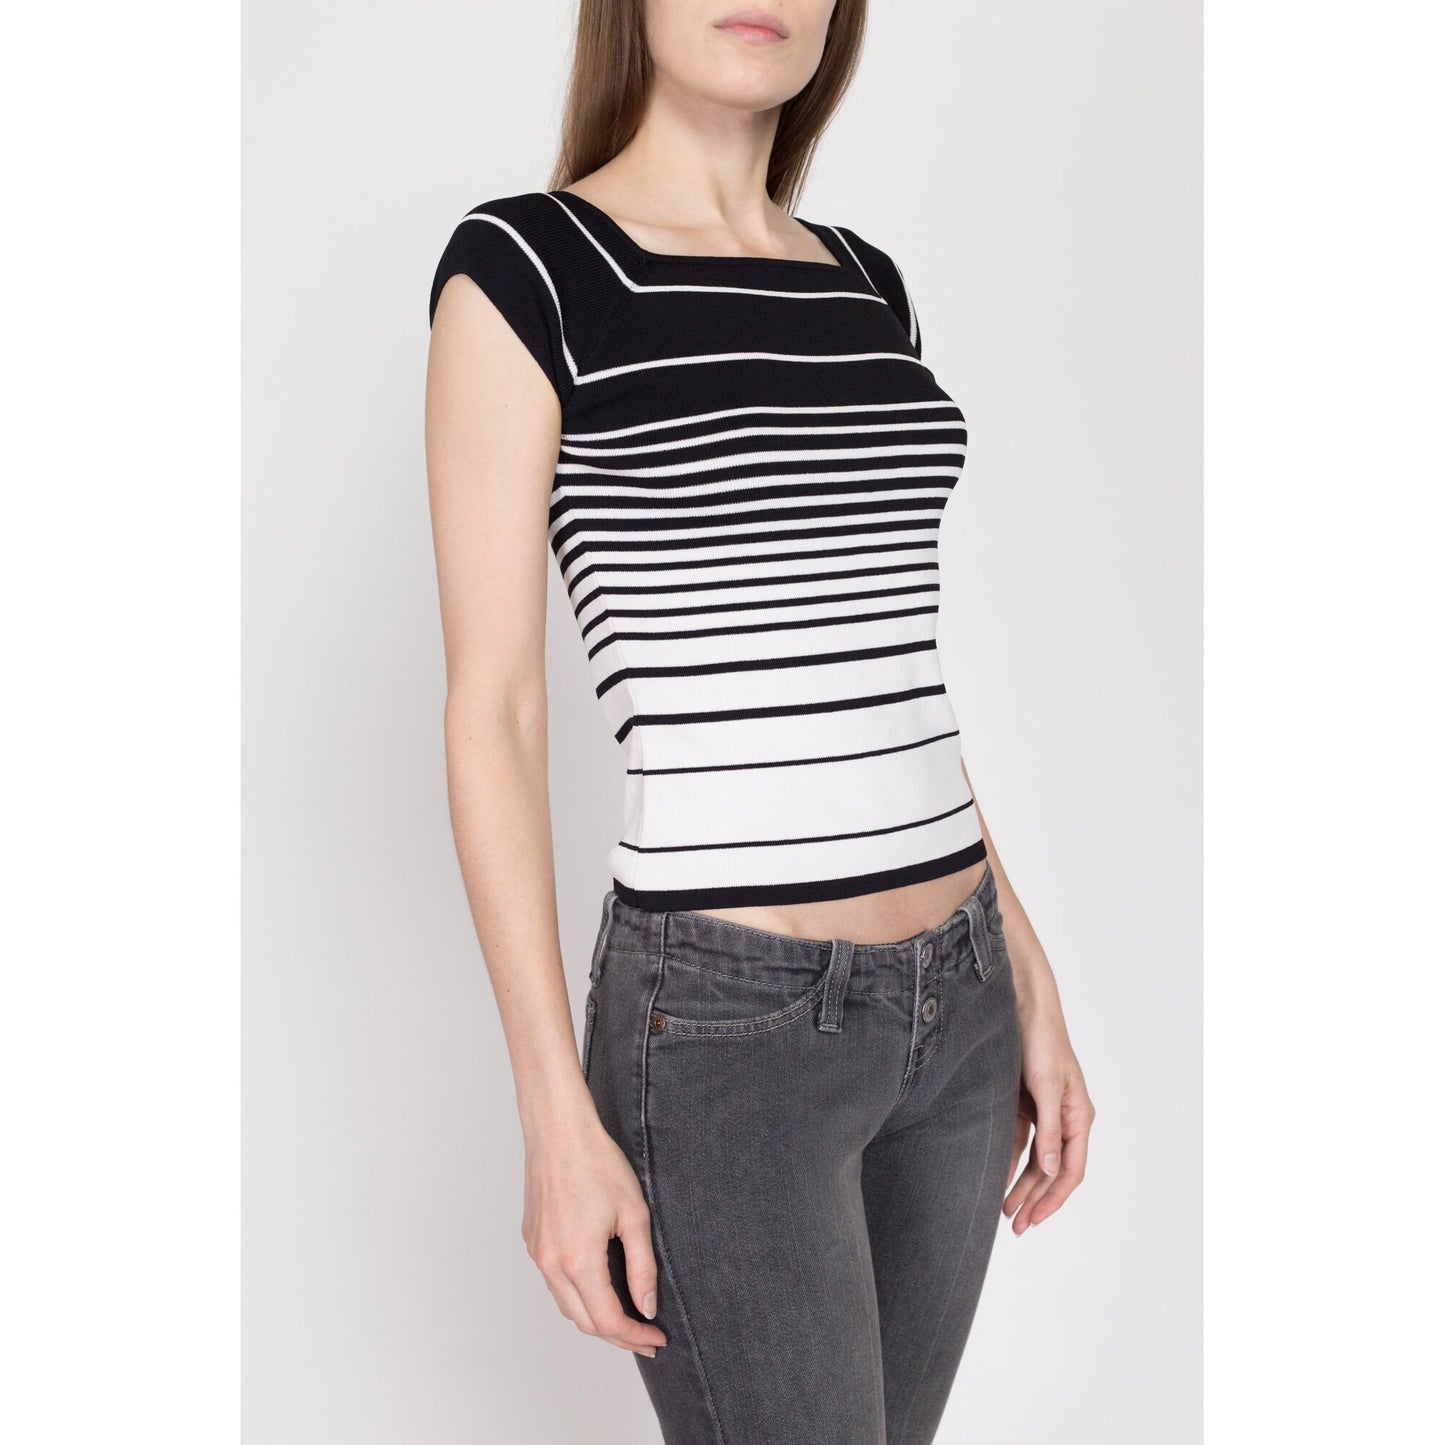 Small Y2K Black & White Gradient Striped Knit Top | Vintage Cap Sleeve Square Neck Fitted Shirt